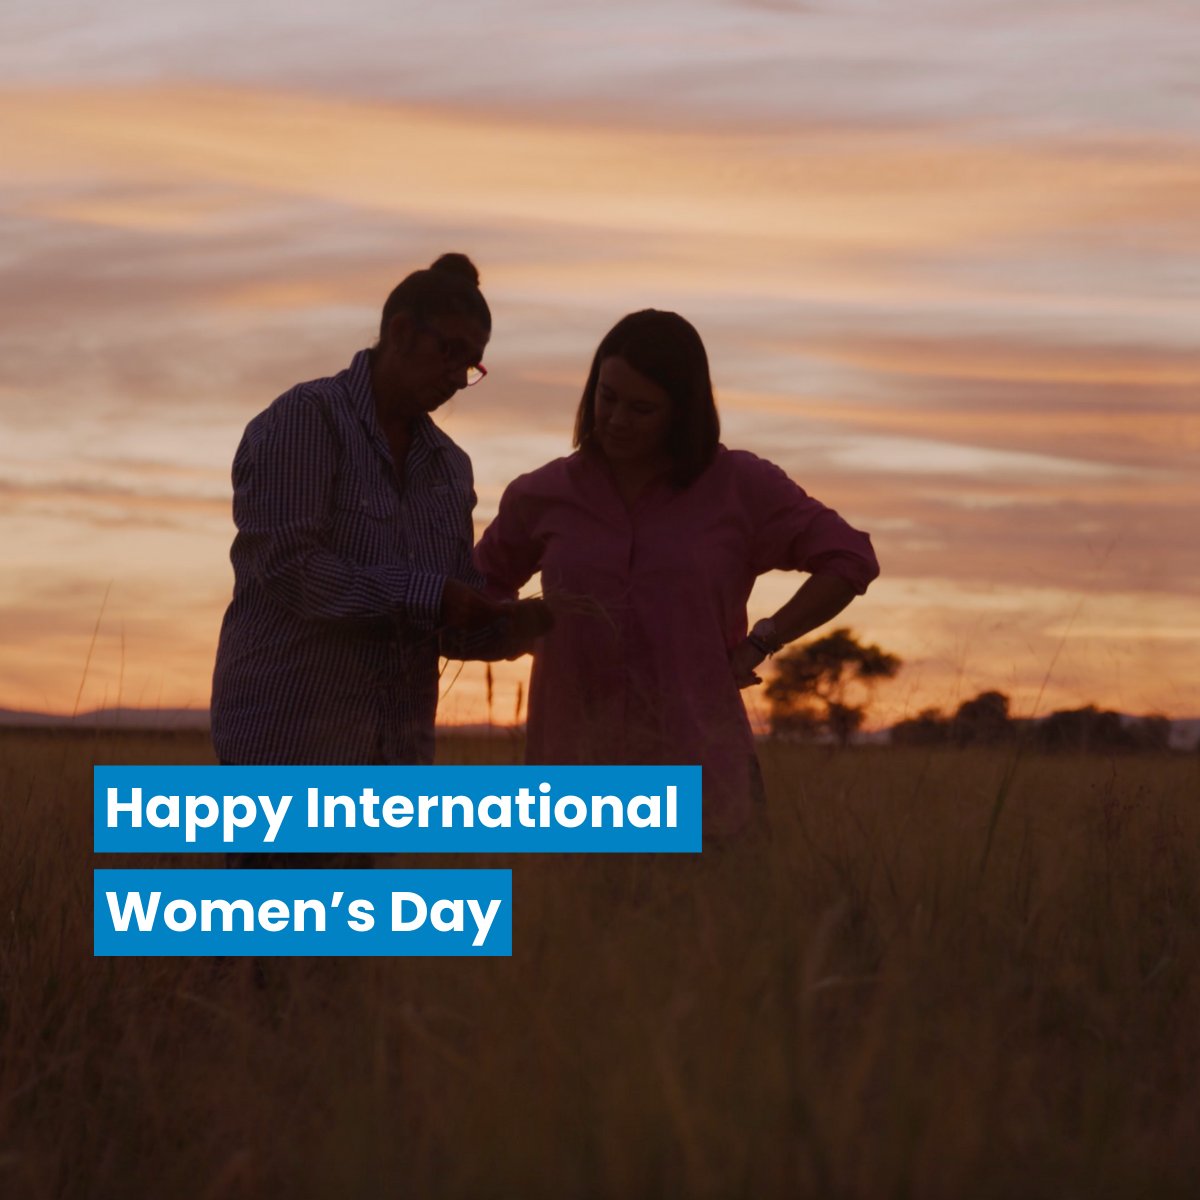 Celebrating International Women's Day, featuring some of the many faces of women in agriculture. 

#internationalwomensday #IWD2024 #cussonsmedia #agmedia #helpingagthrive #foundedinagriculture #australianag #australianfarming